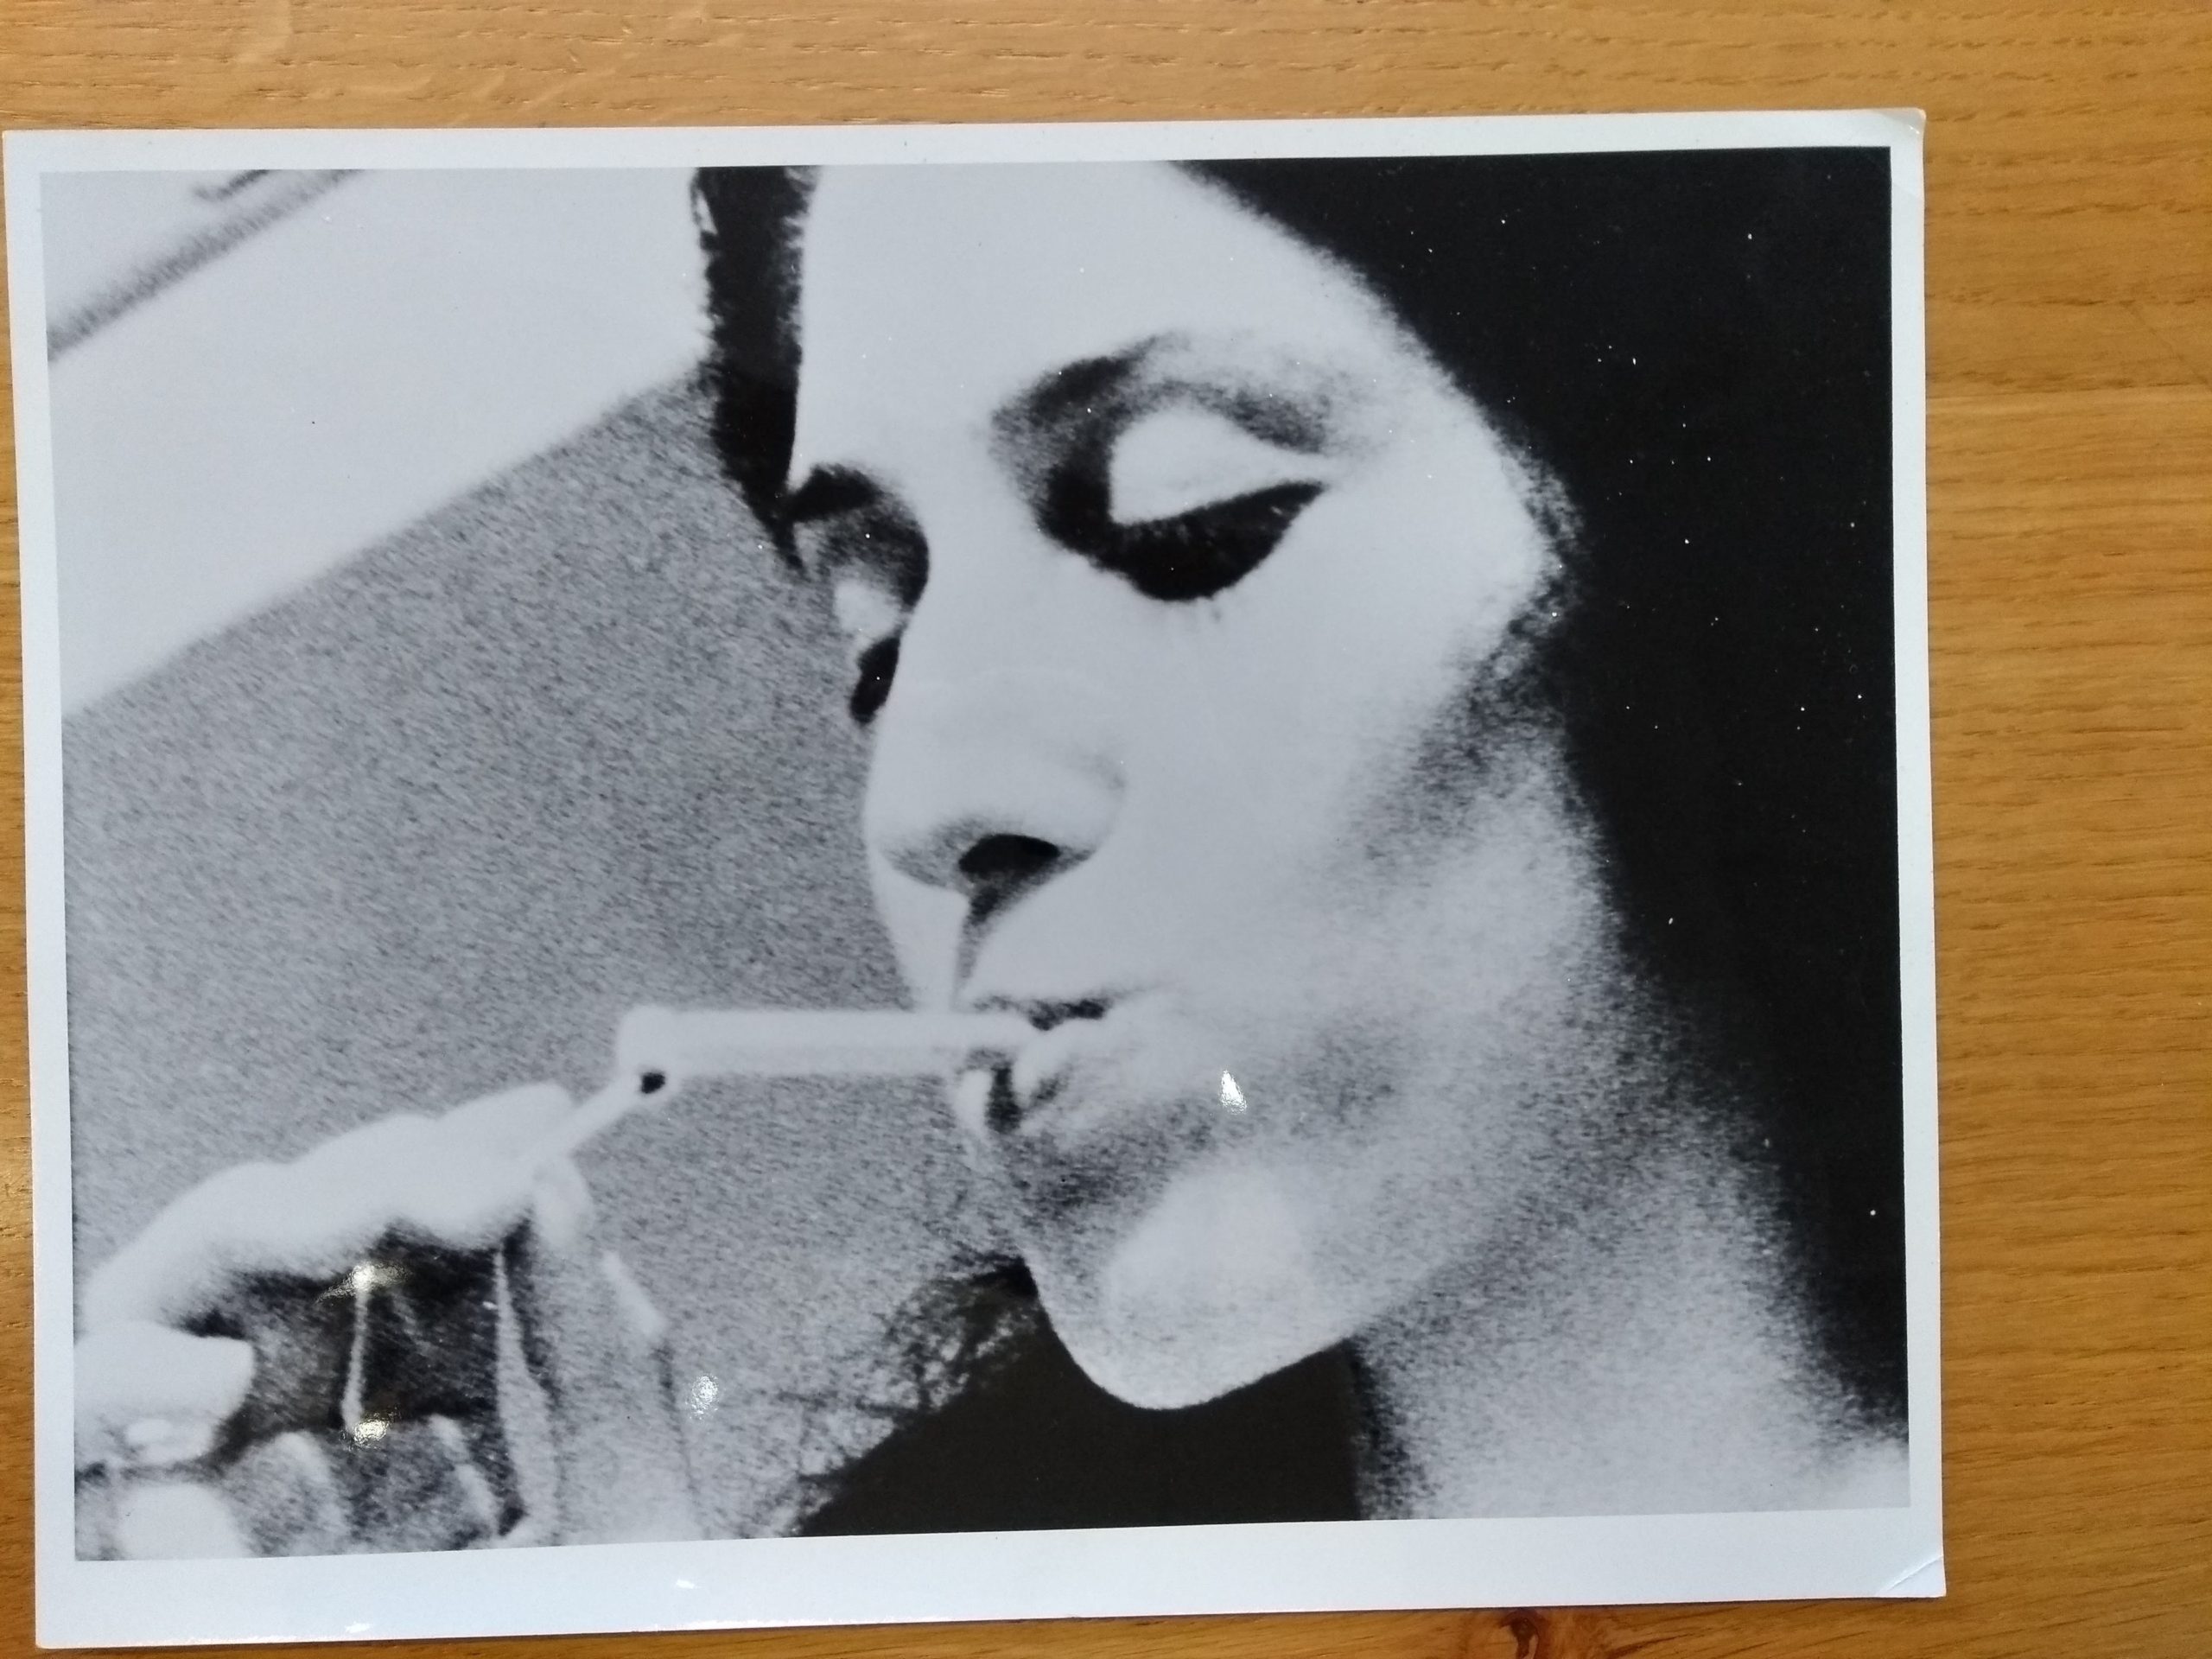 A B&W photograph on a wooden surface. In the picture is a close up of a woman lighting a cigarette with a match.